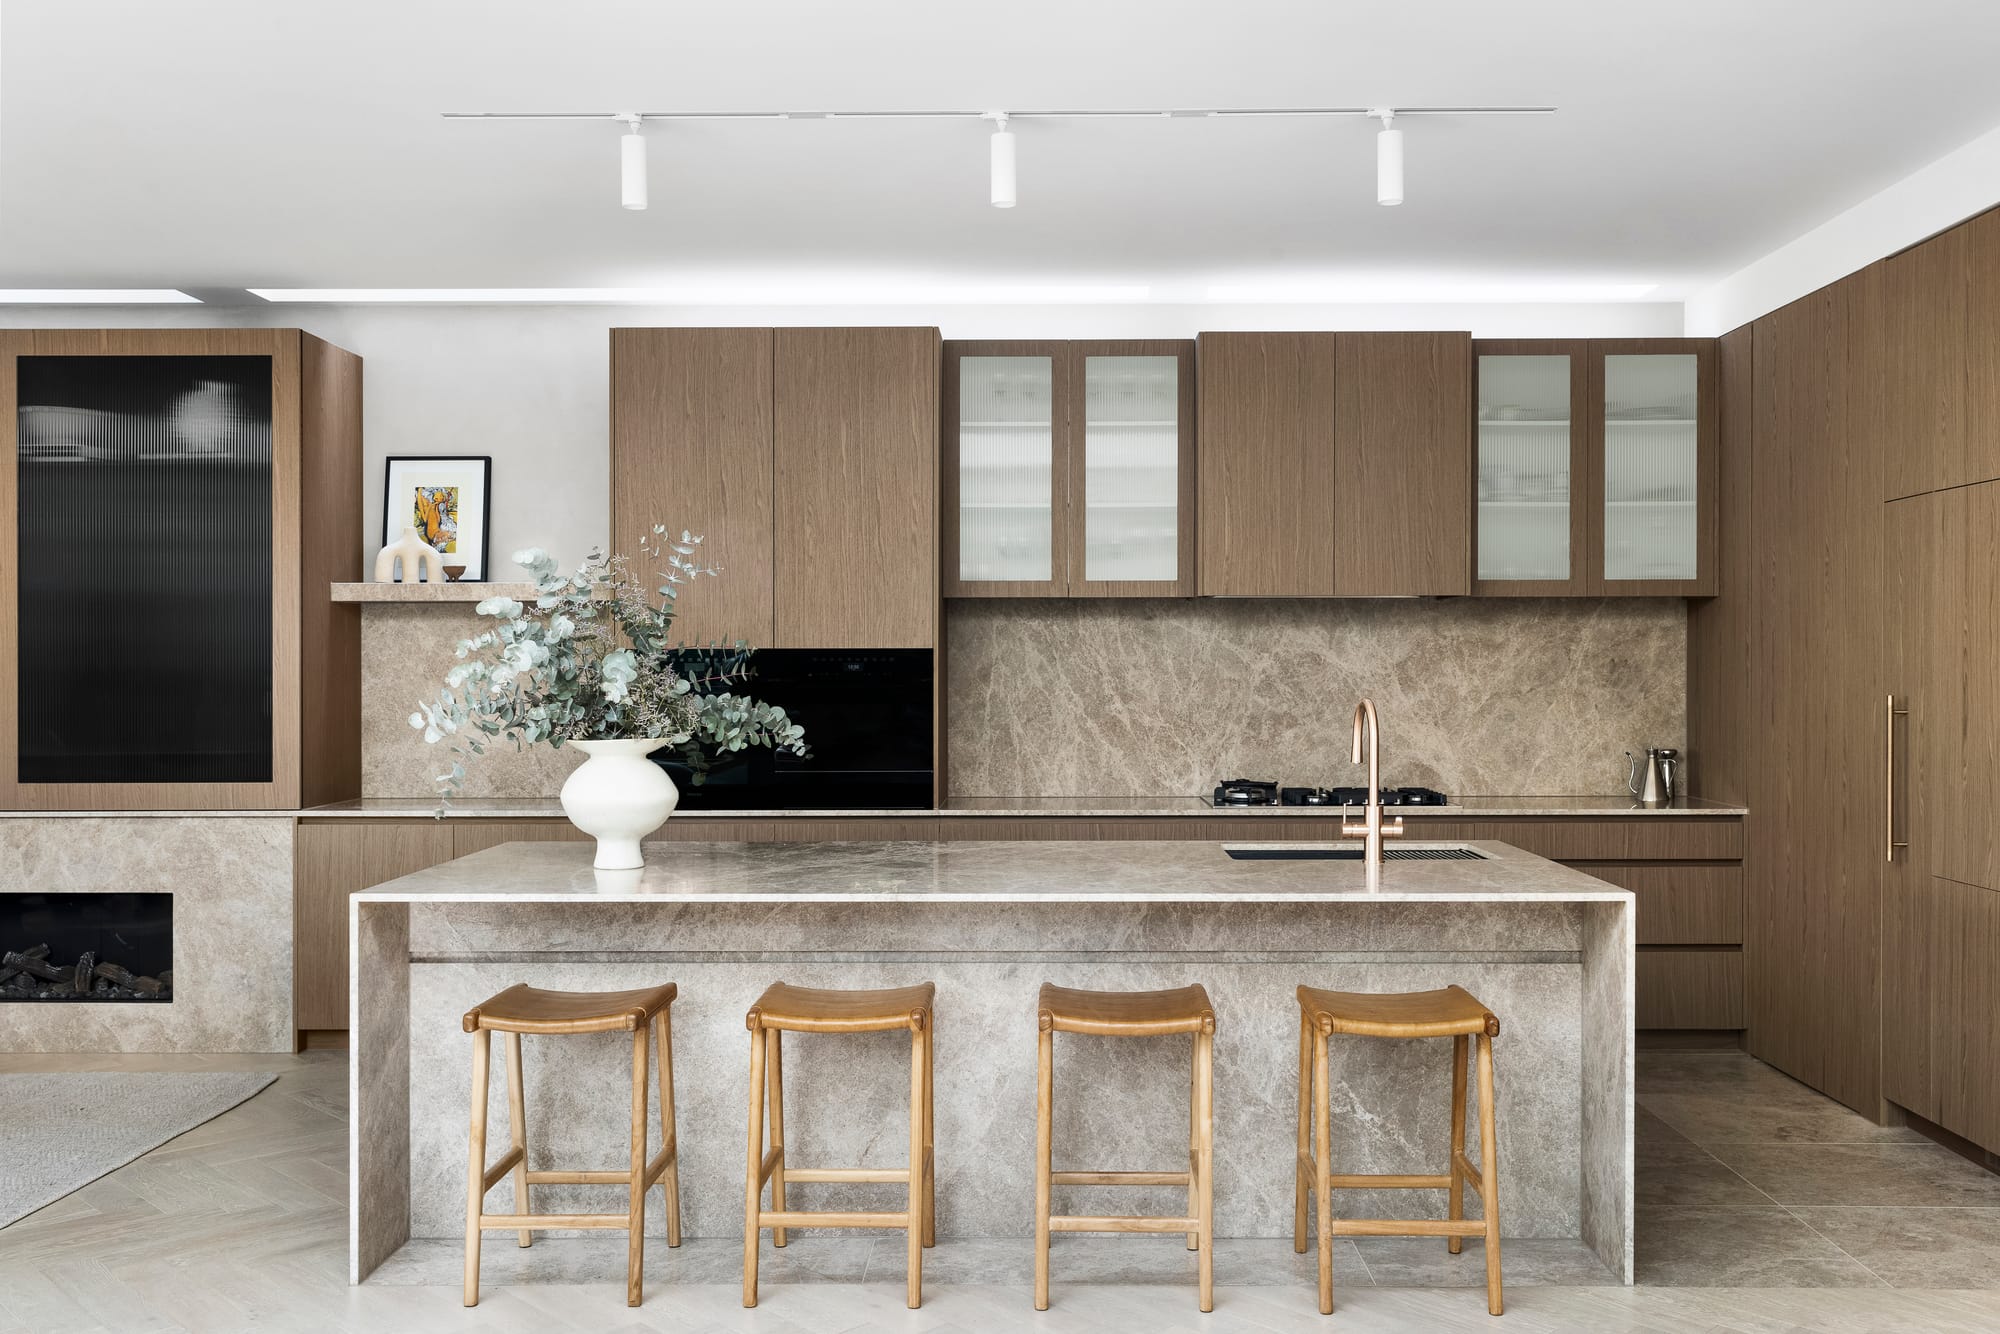 Goldsmith Residence by C.Kairouz Architects. Photography by Spacecraft. Kitchen with timber cabinetry. Stone island bench and splashback. Timber stools at island. Stone floors. 